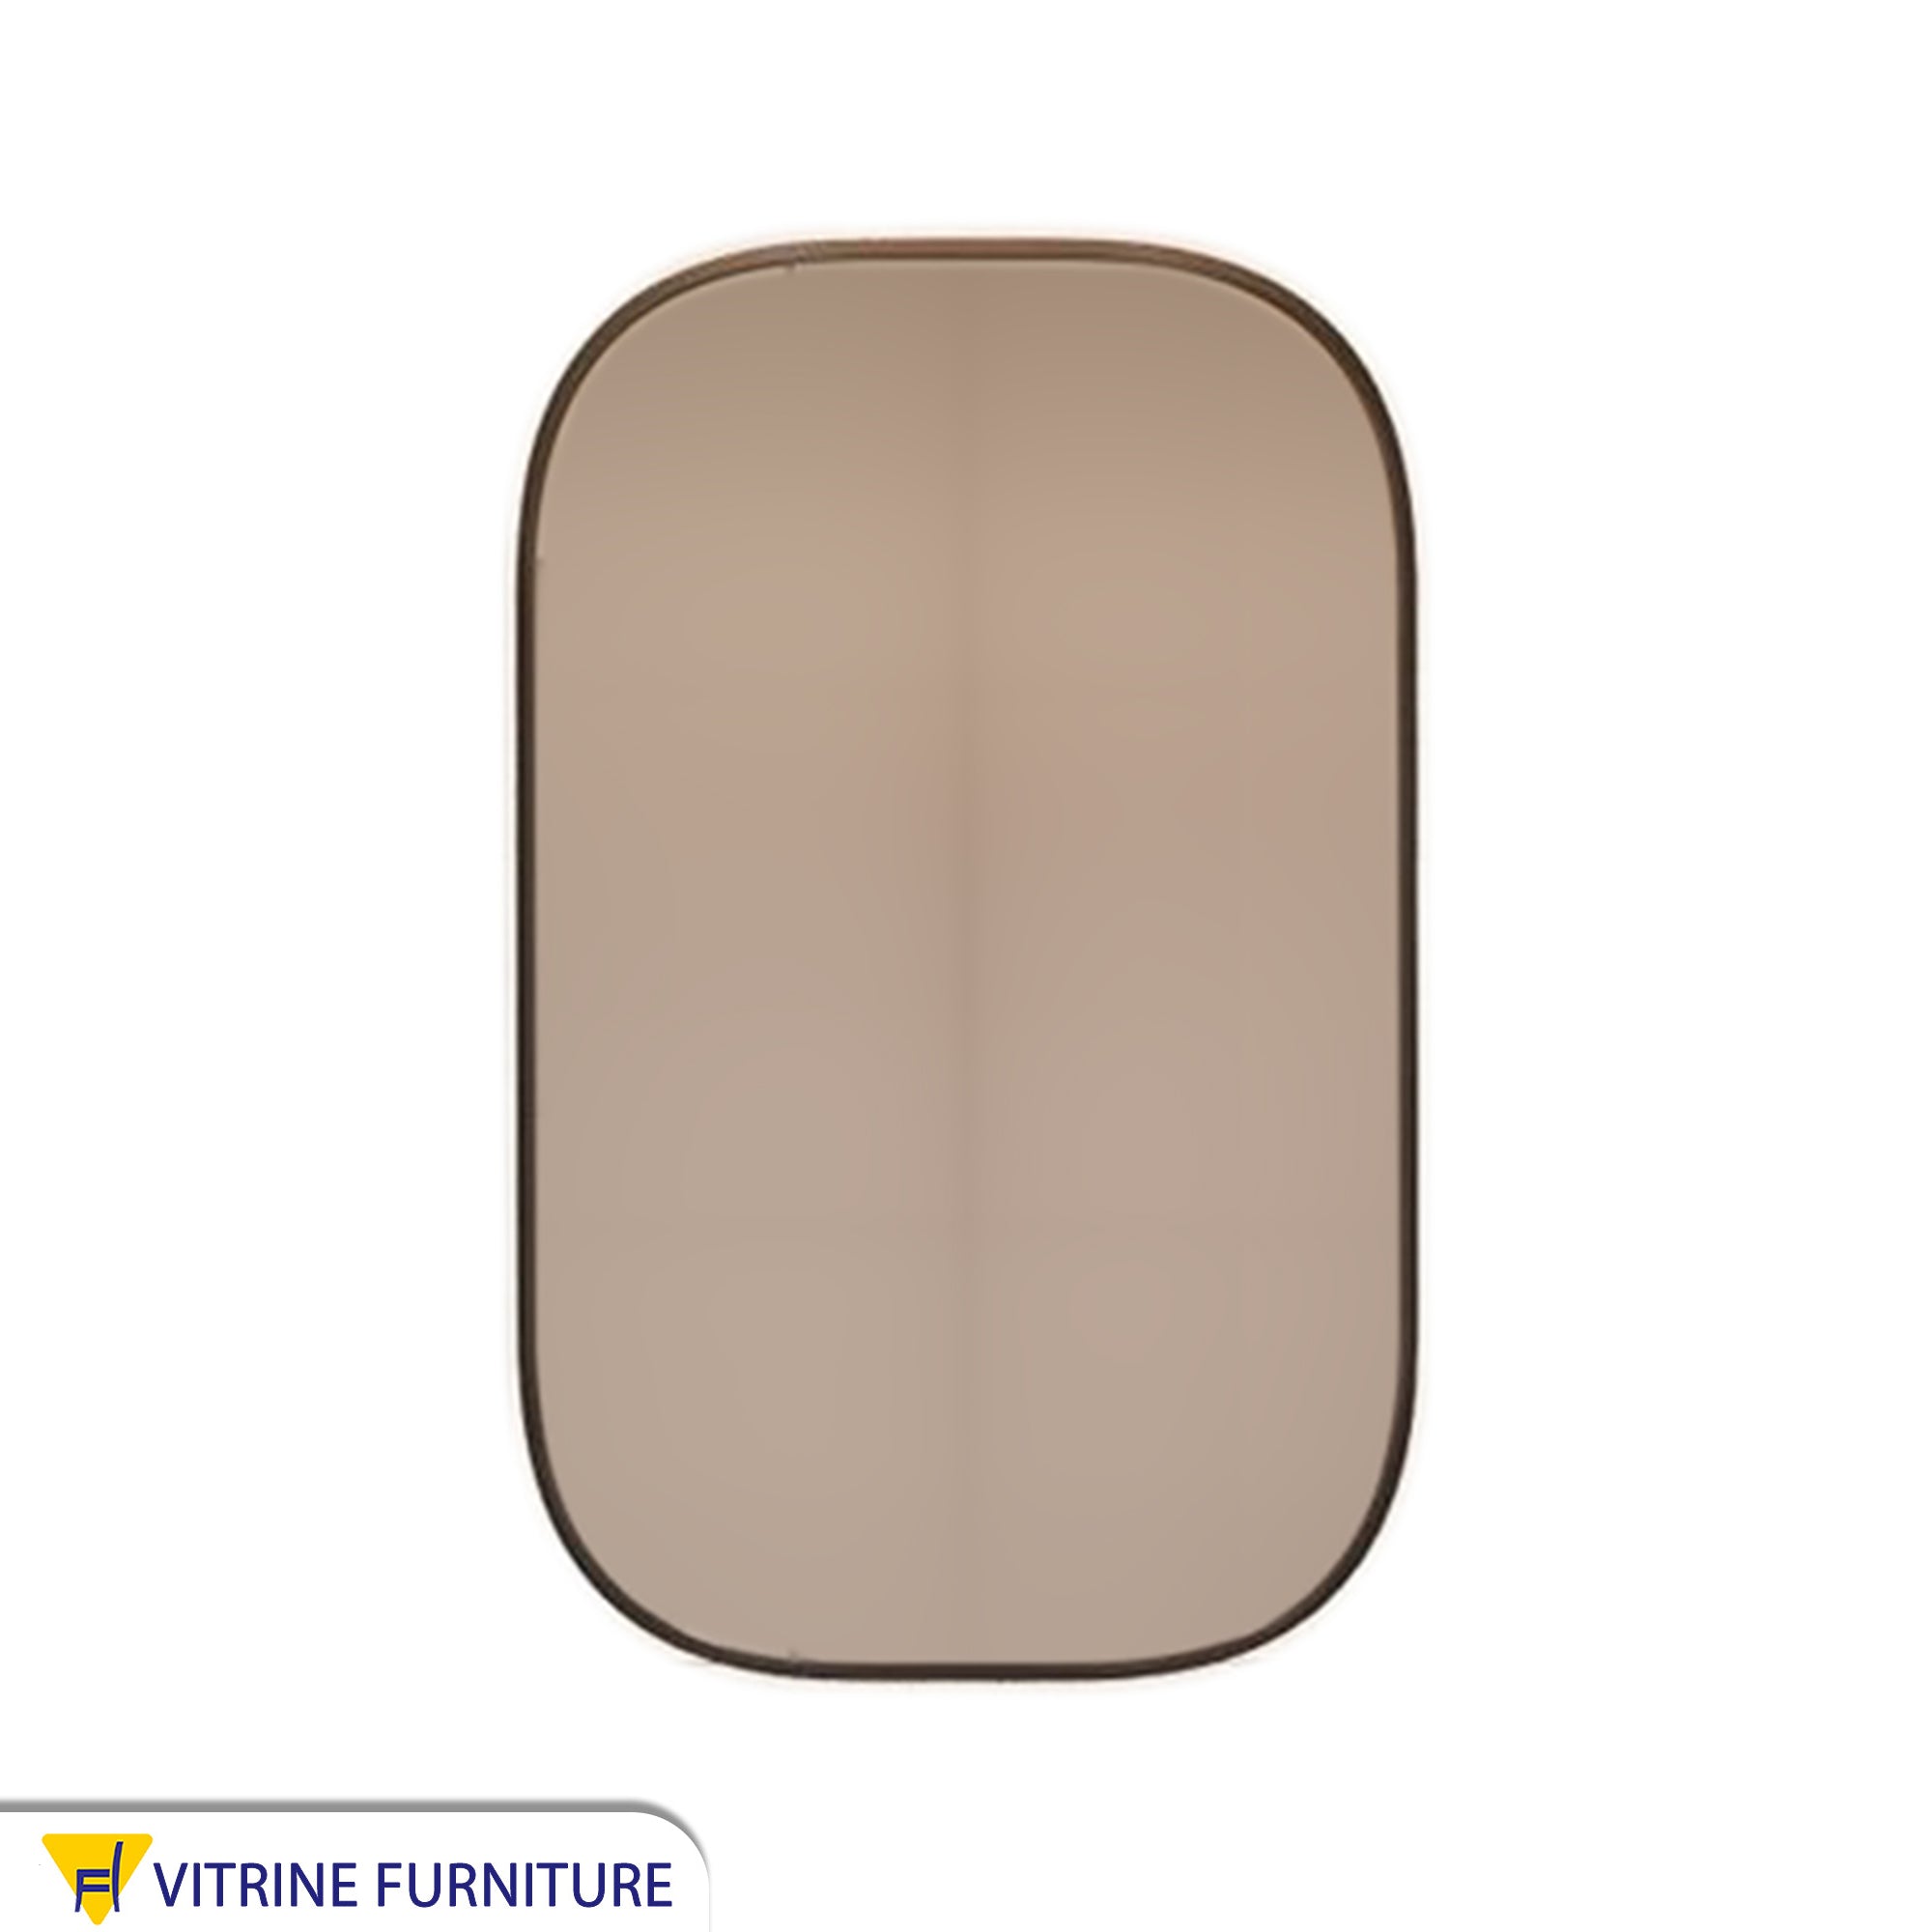 Rectangular mirror 60 * 80 with a wooden frame in black + LED